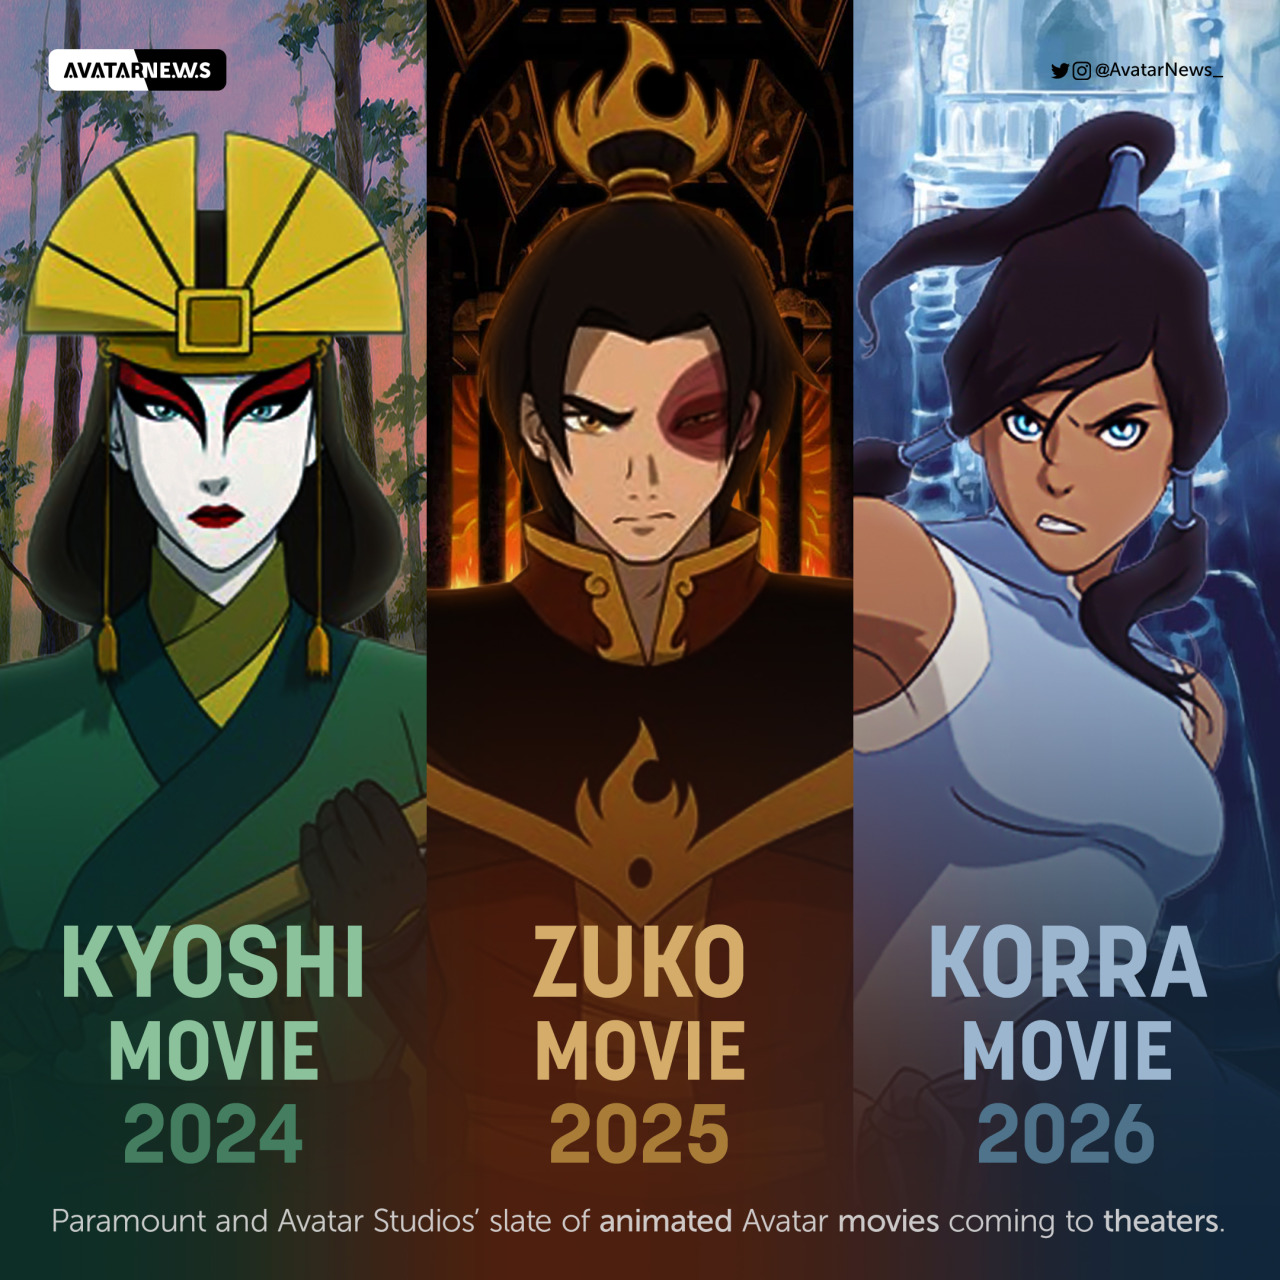 Avatar Legend of Korra Failed to Escape The Last Airbenders Shadow